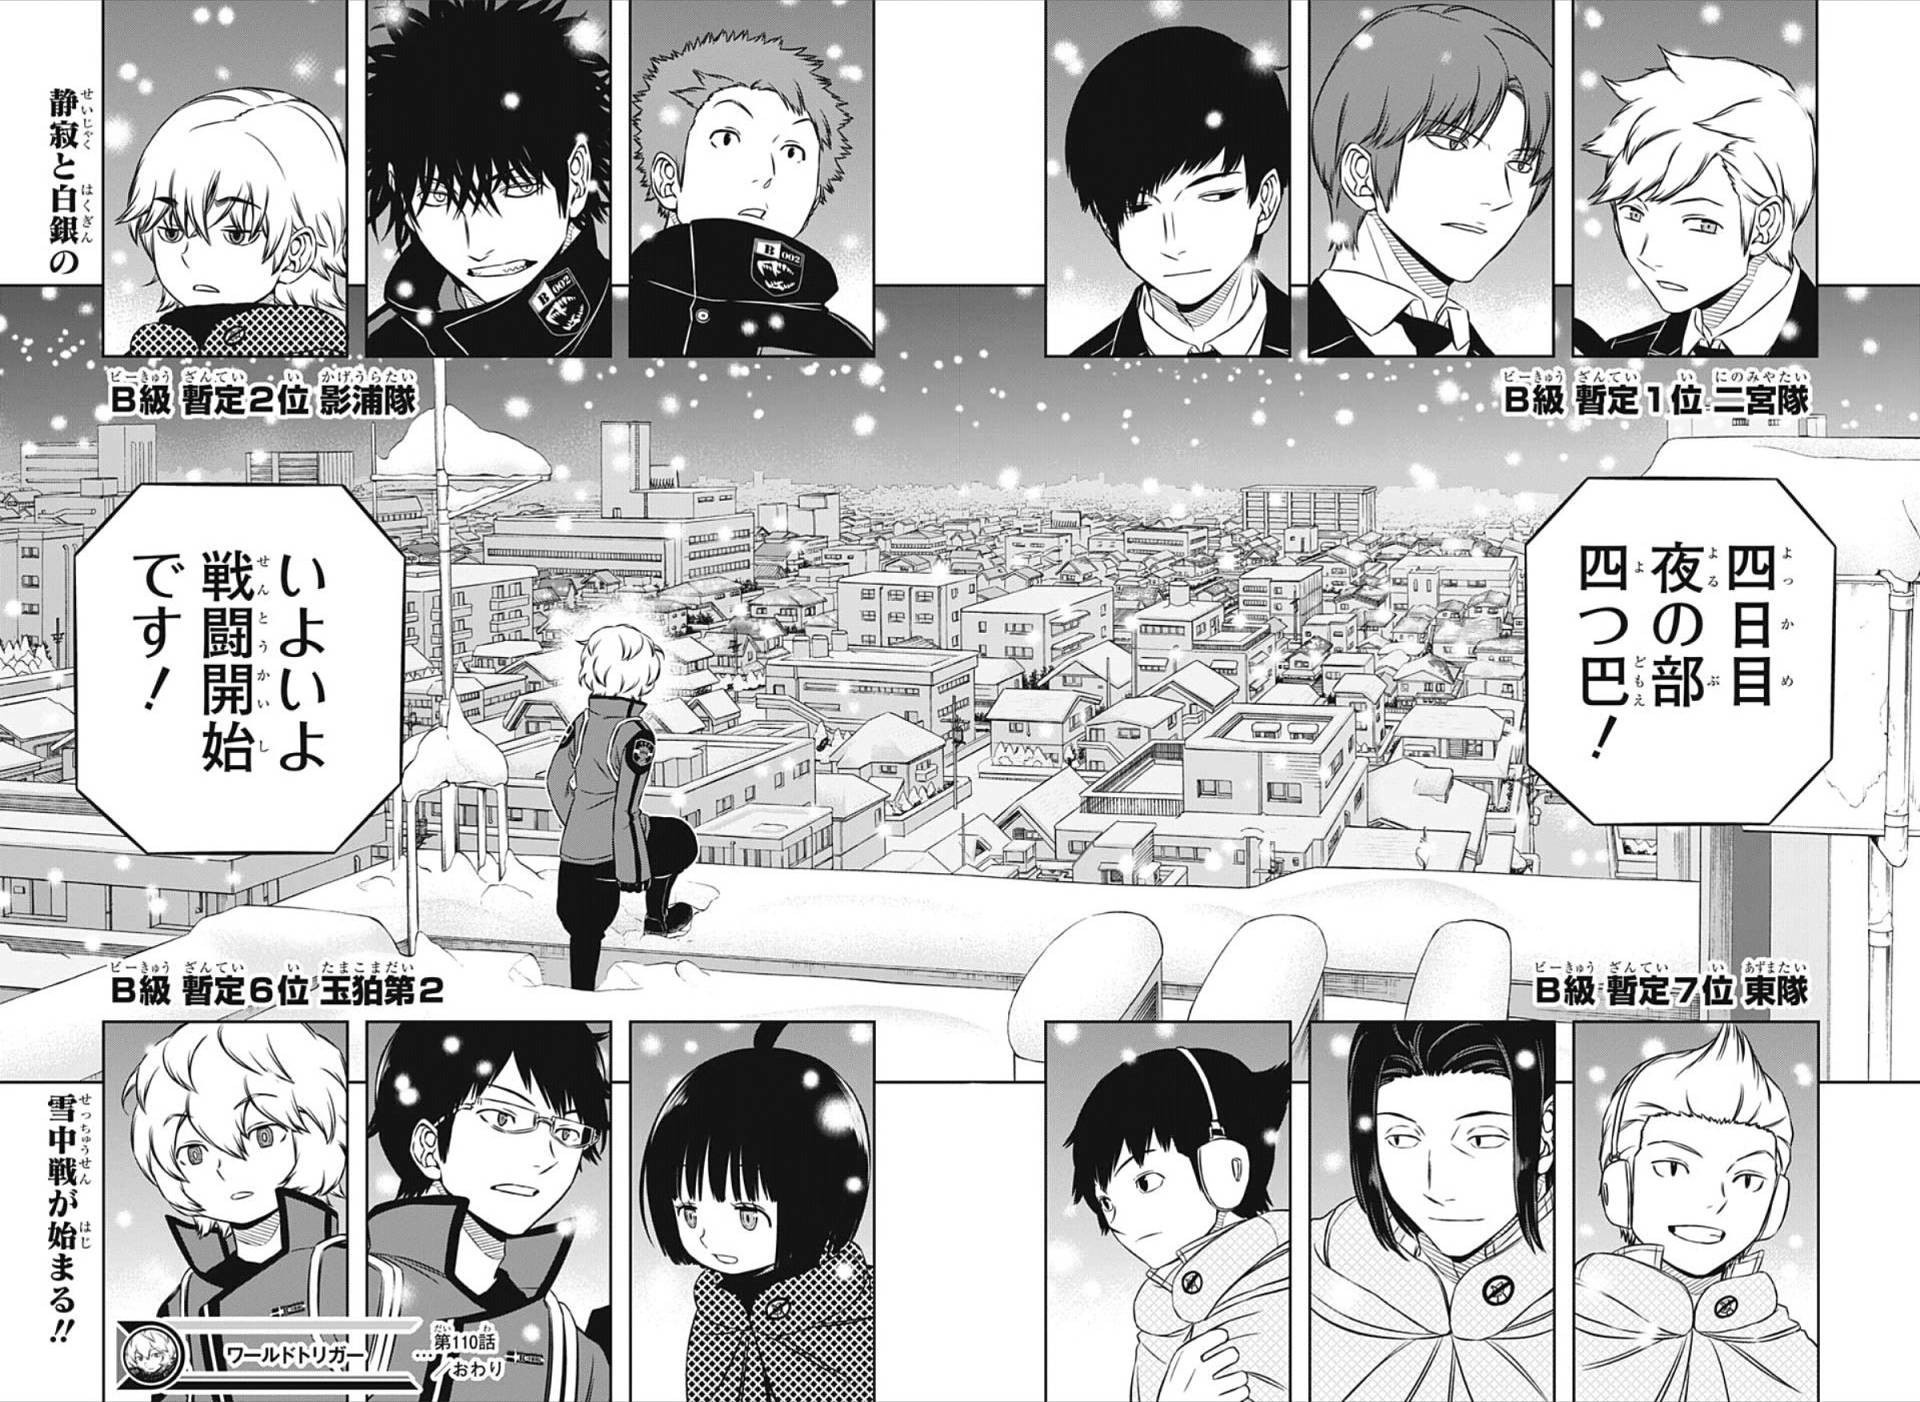 World Trigger - Chapter 110 - Page 18